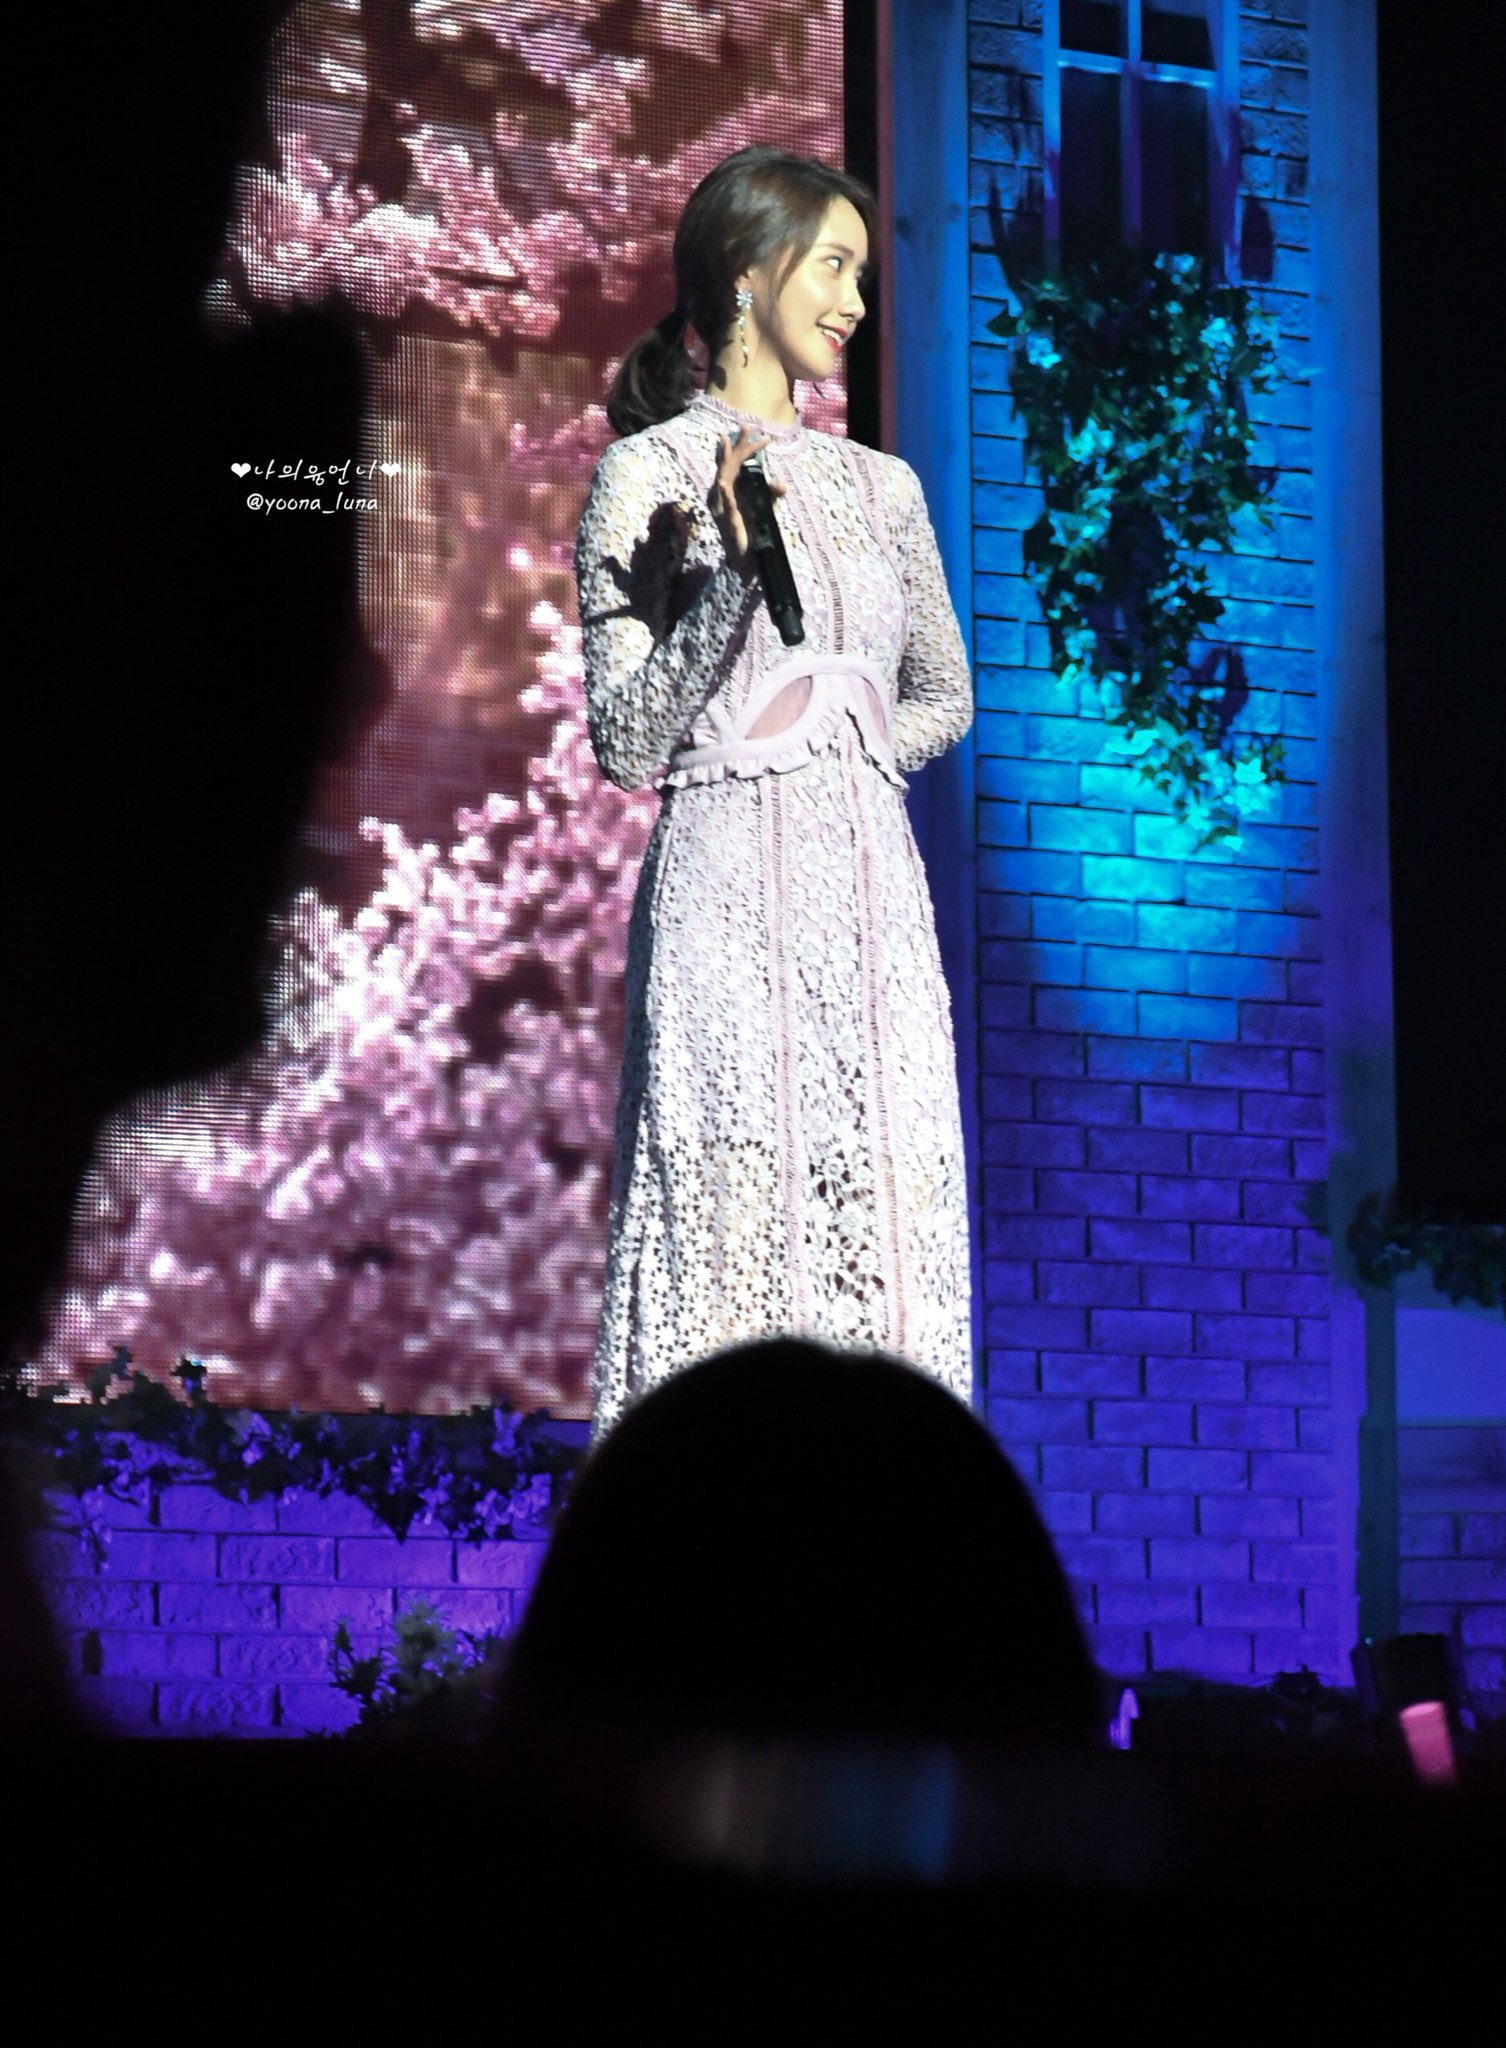 180713 YOONA FANMEETING TOUR, So Wonderful Day #Story_1 in TOKYO 윤아 by yoona_lun (2).jpg